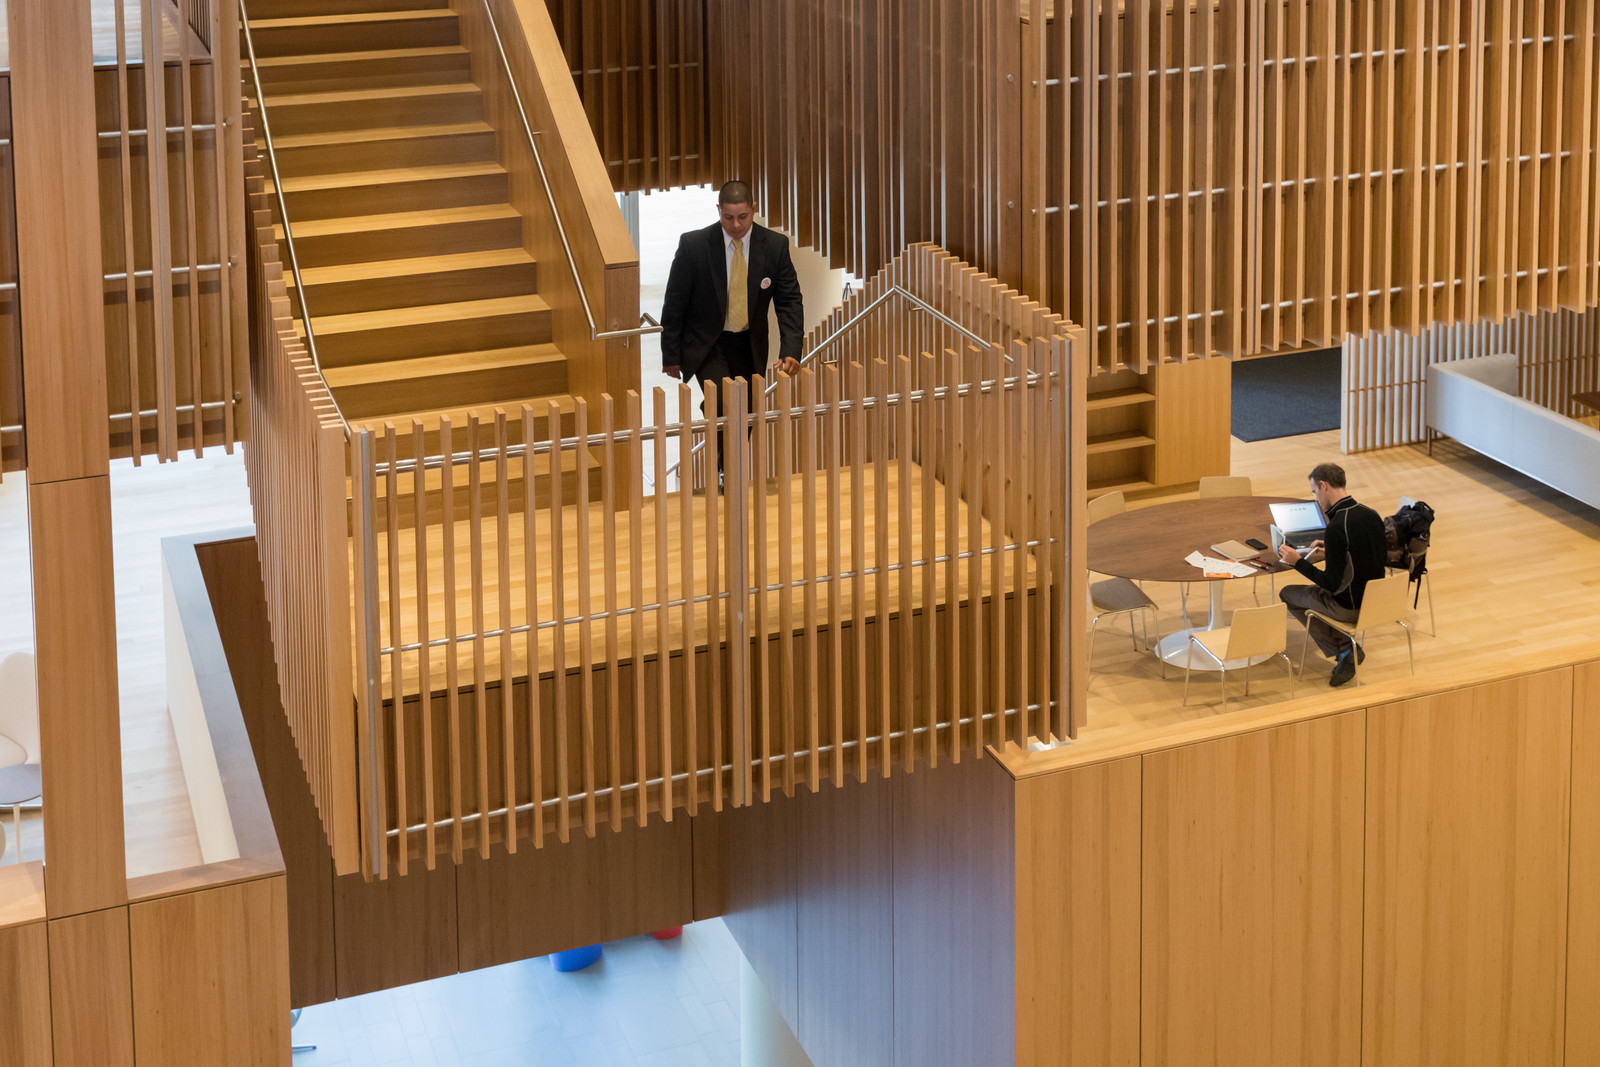 A birdseye view of one of the many integral stairs that work so well on the Novartis campus. This stair looks out over the Atrium. The space is filled with many different types of breakout spaces, to foster collaboration.